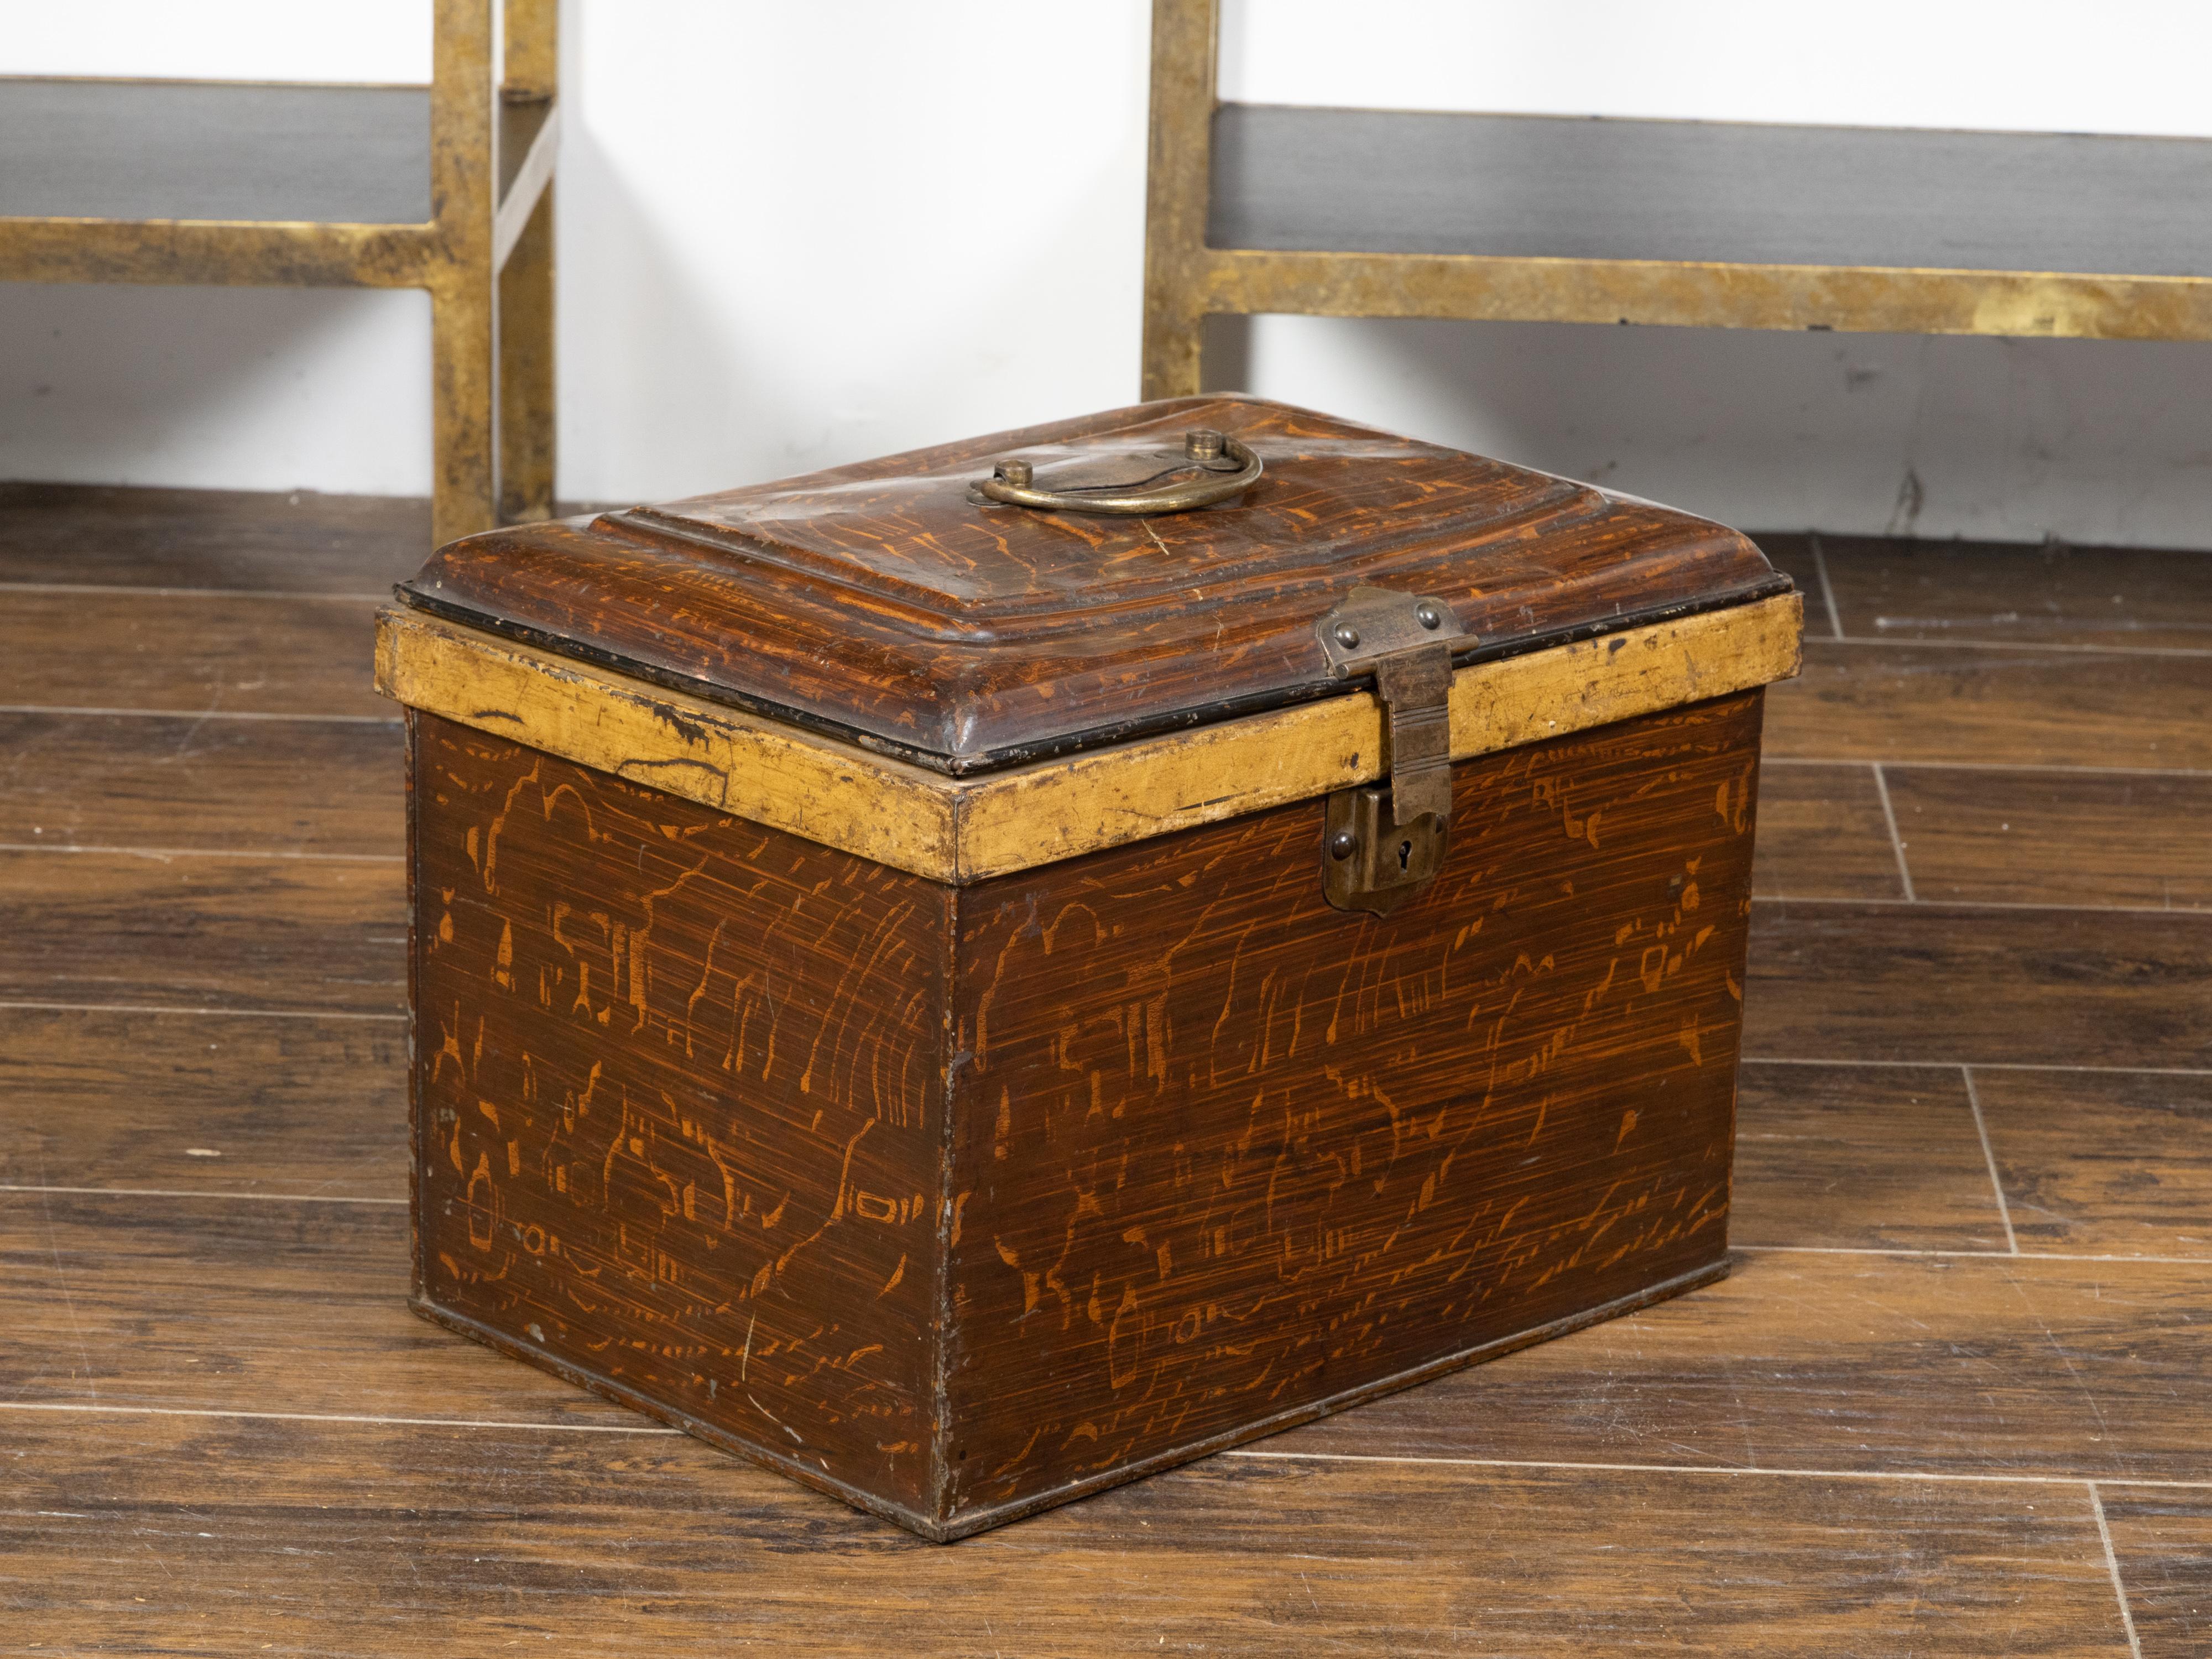 French 1890s Rustic Painted Tôle Box with Wood Grain Finish and Goldenrod Accent For Sale 3